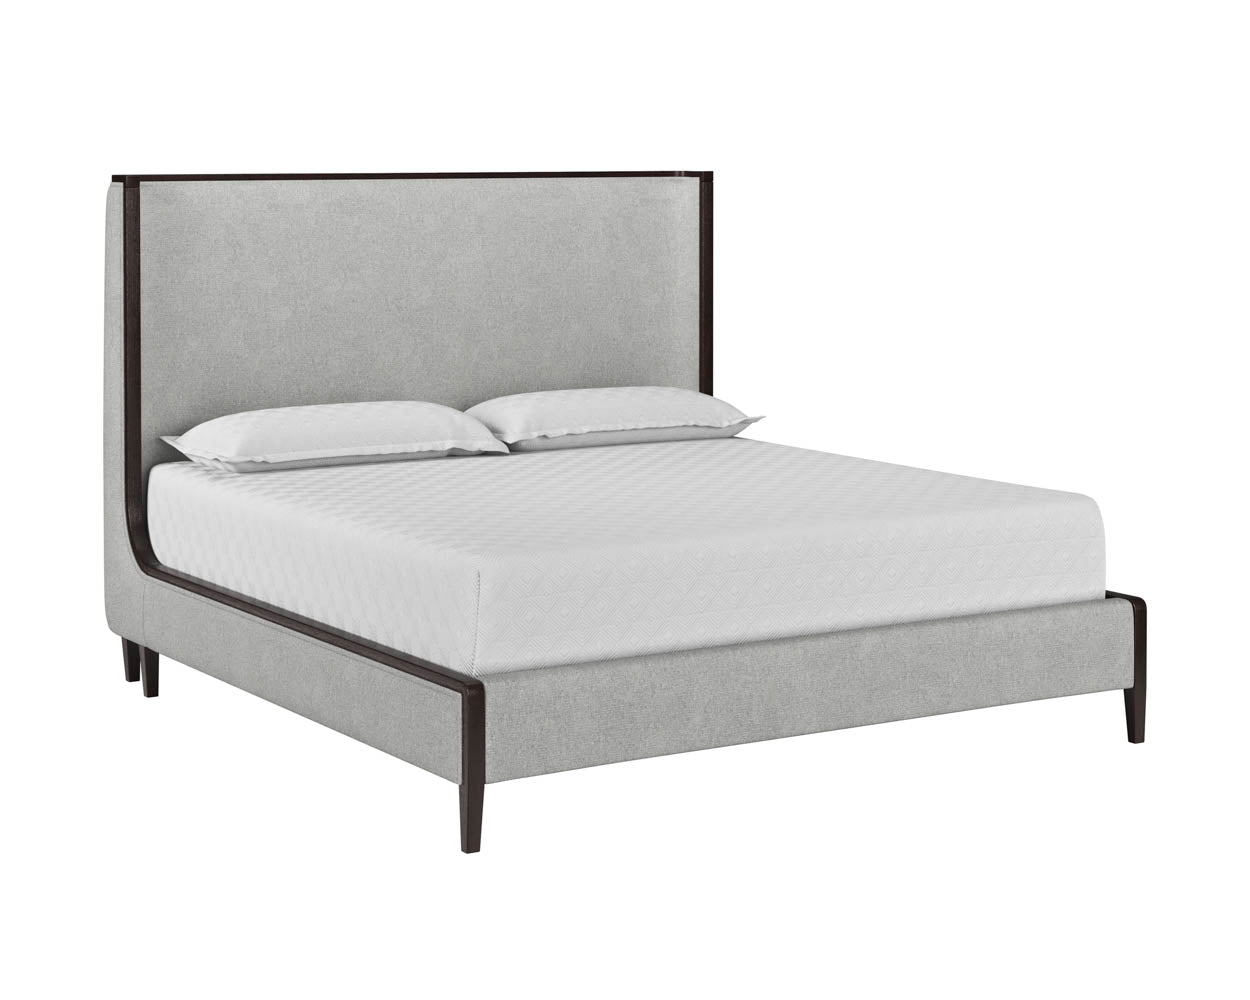 Picture of Colette King Bed - Belfast Heather Grey